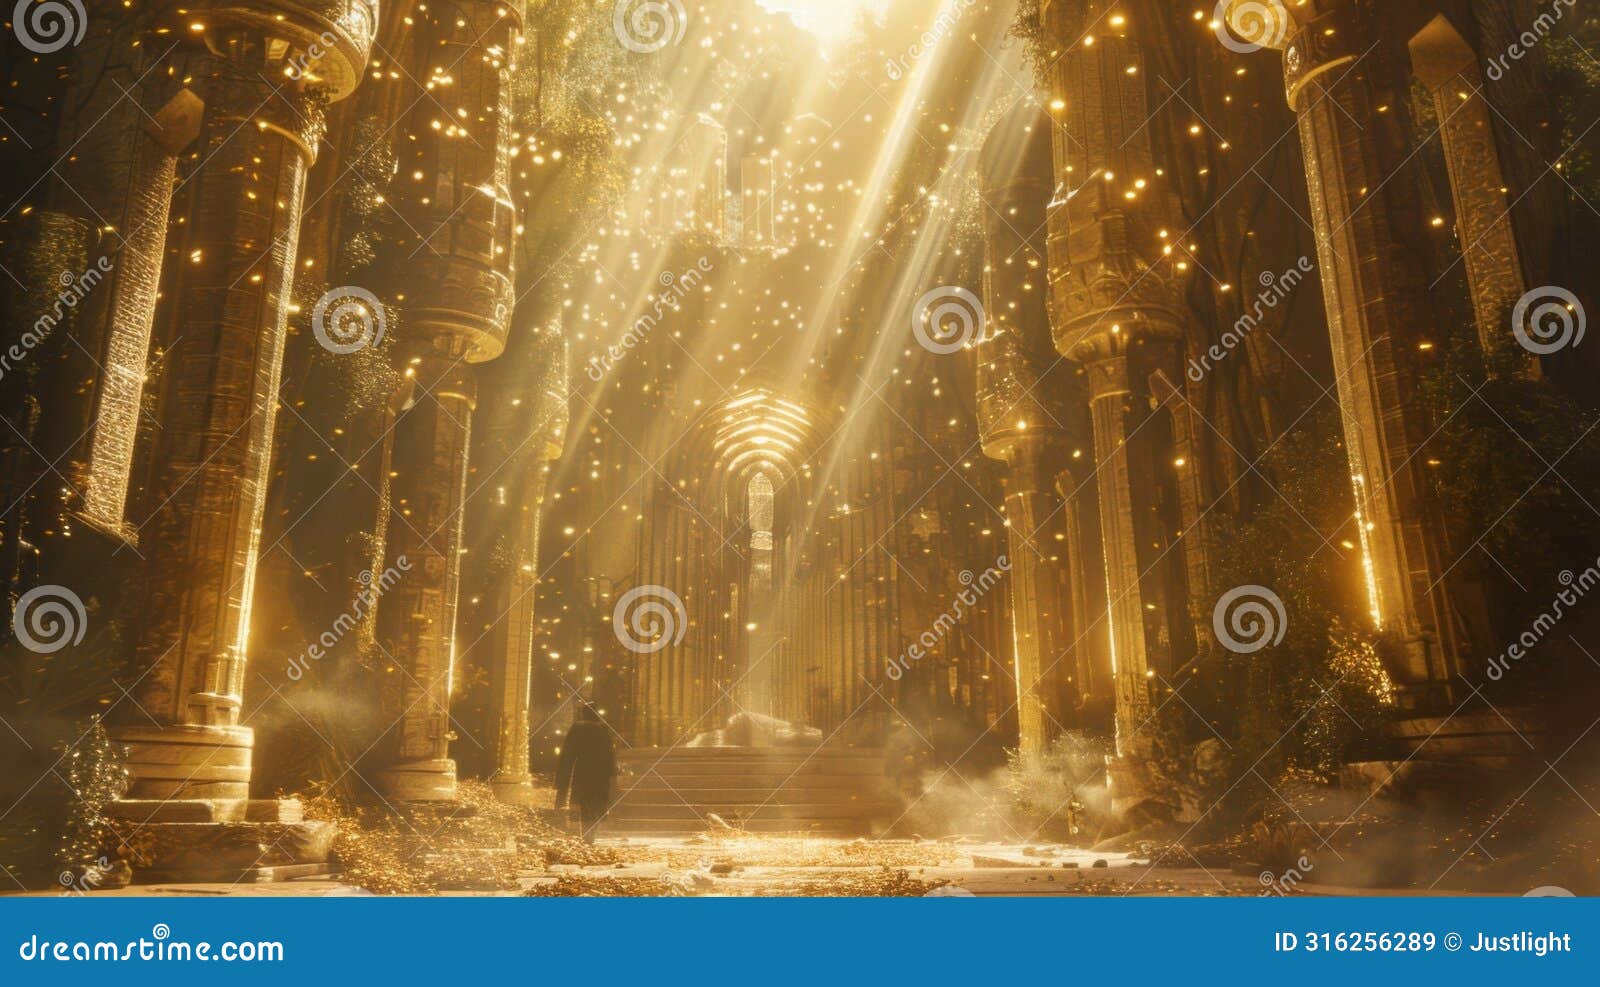 as you step onto the sanctuary you are greeted with warm golden light and the gentle hum of magical energy. pillars of